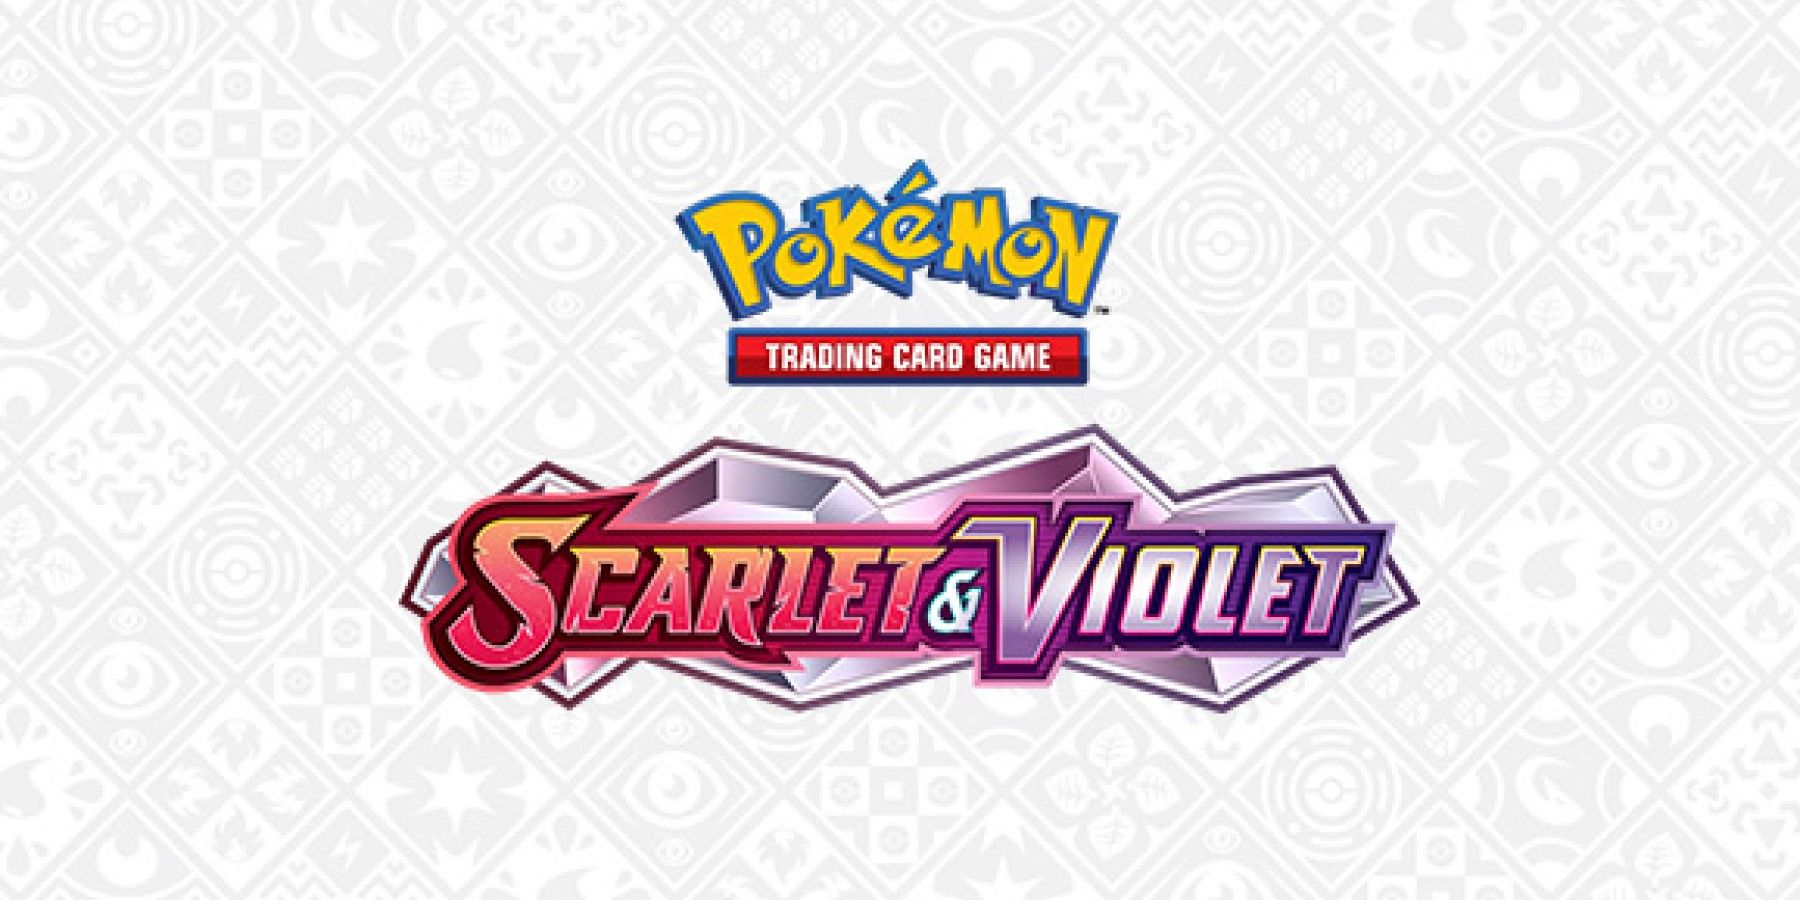 Pokemon TCG First Pokemon Scarlet and Violet Products Breakdown